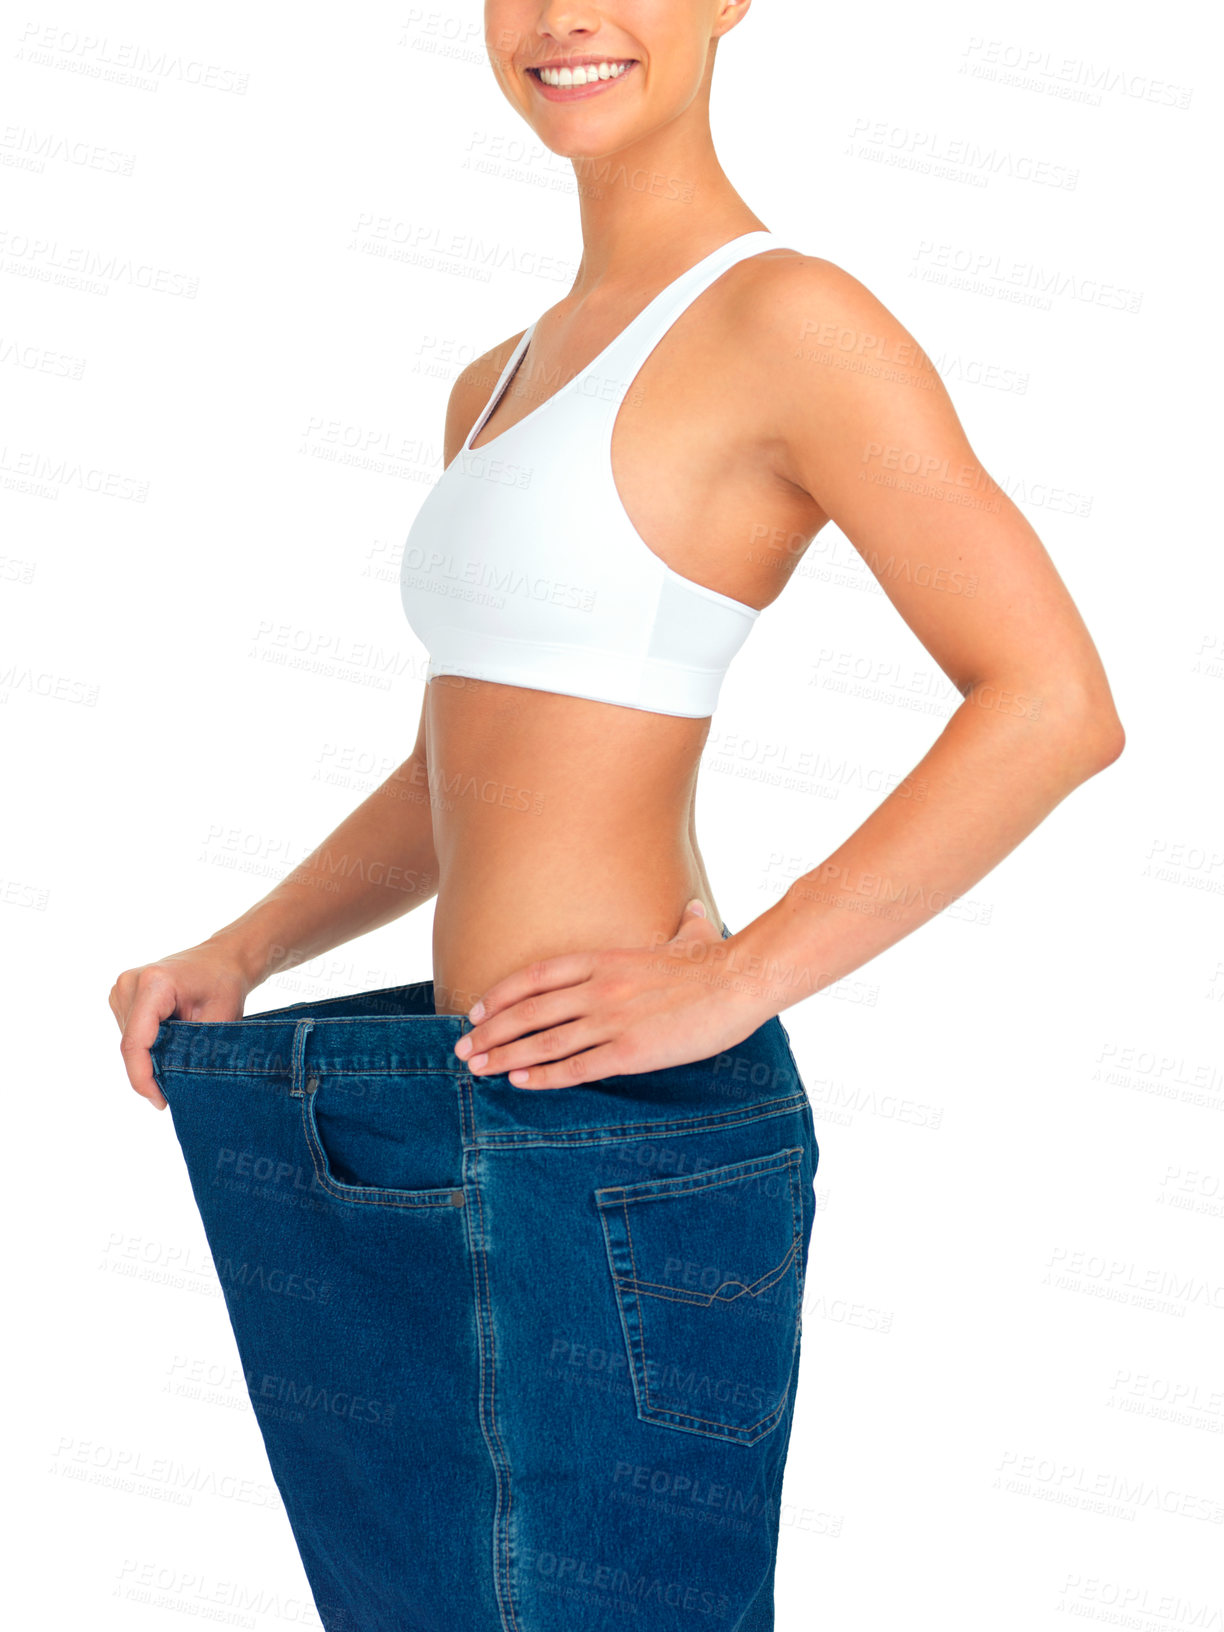 Buy stock photo Health, weight loss and woman with jeans and tummy tuck with skinny waist, cropped and isolated on white background. Fitness, healthcare and wellness, girl with slim figure after liposuction or diet.